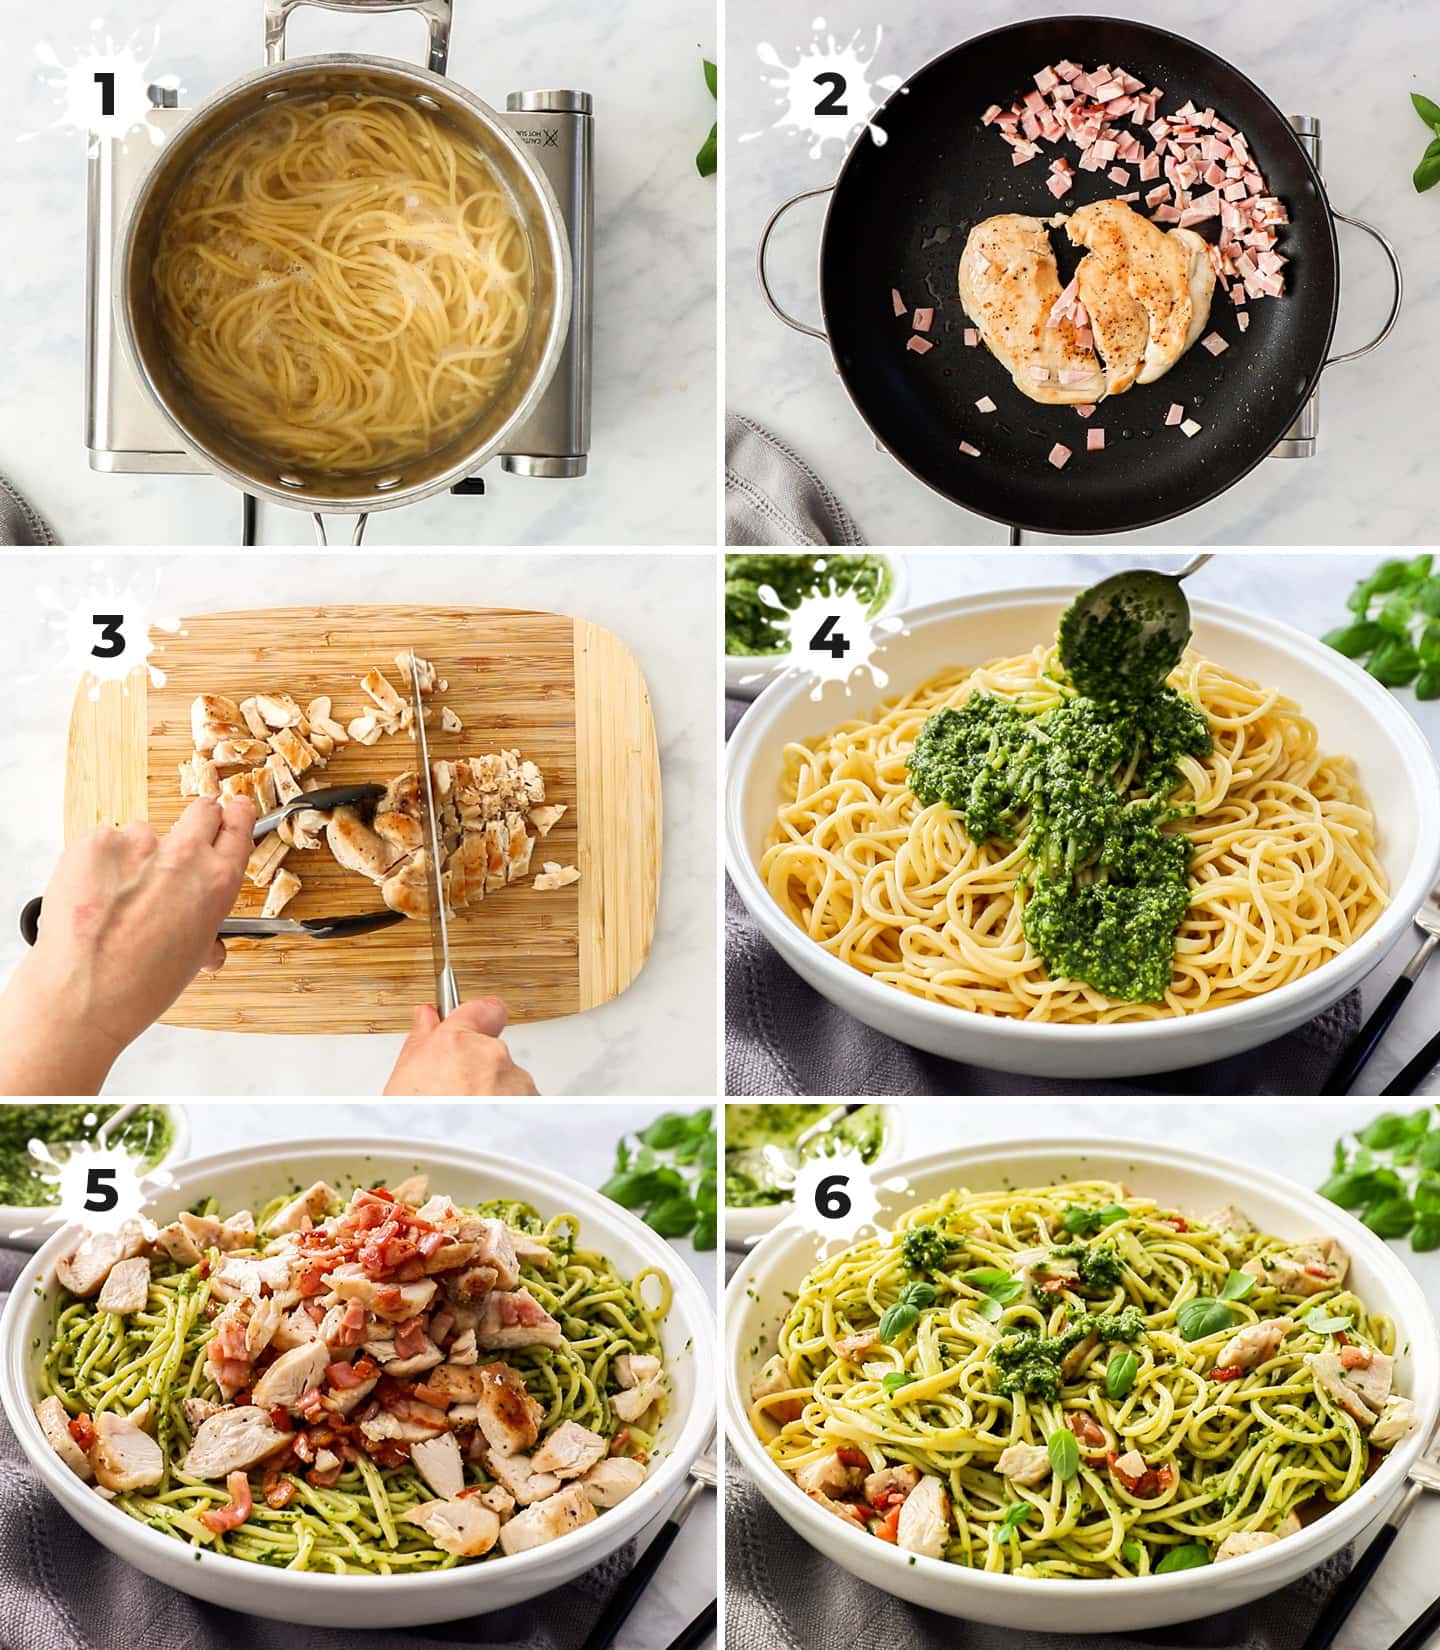 A collage of 6 images showing how to make chicken basil pesto pasta.